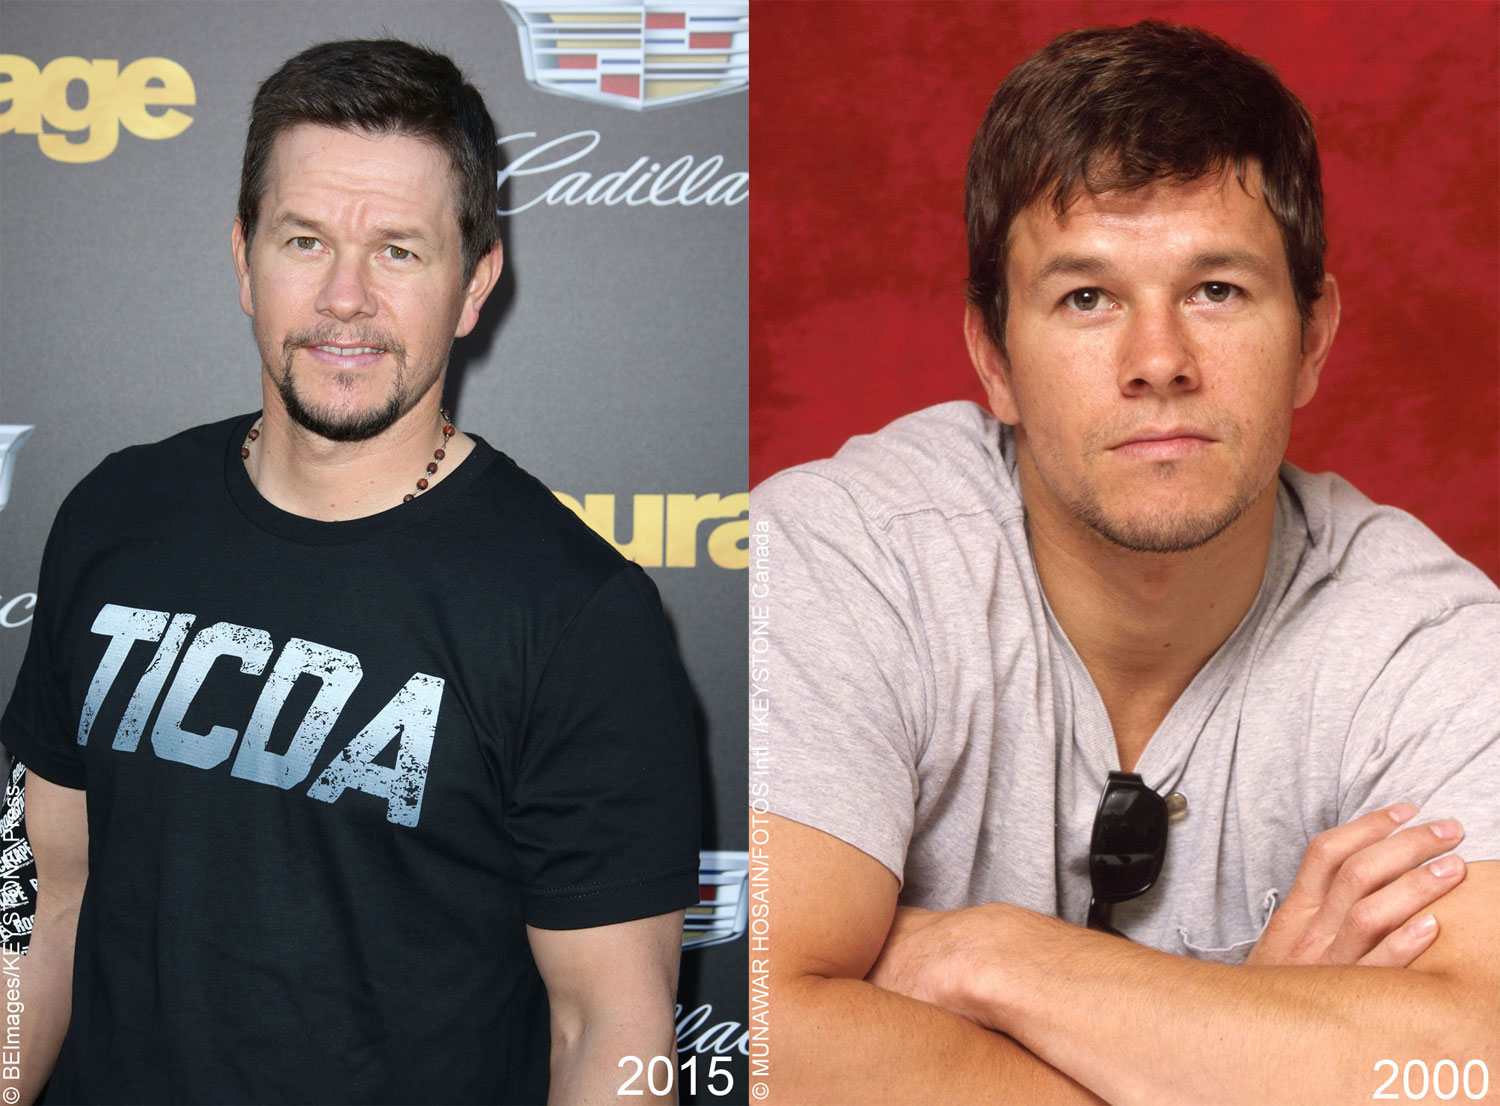 Mark Wahlberg has come a long way since his time as Marky Mark and the Funky Bunch. He’s one of the top stars in Hollywood now, but he still looks as good as he did at the beginning of his career.